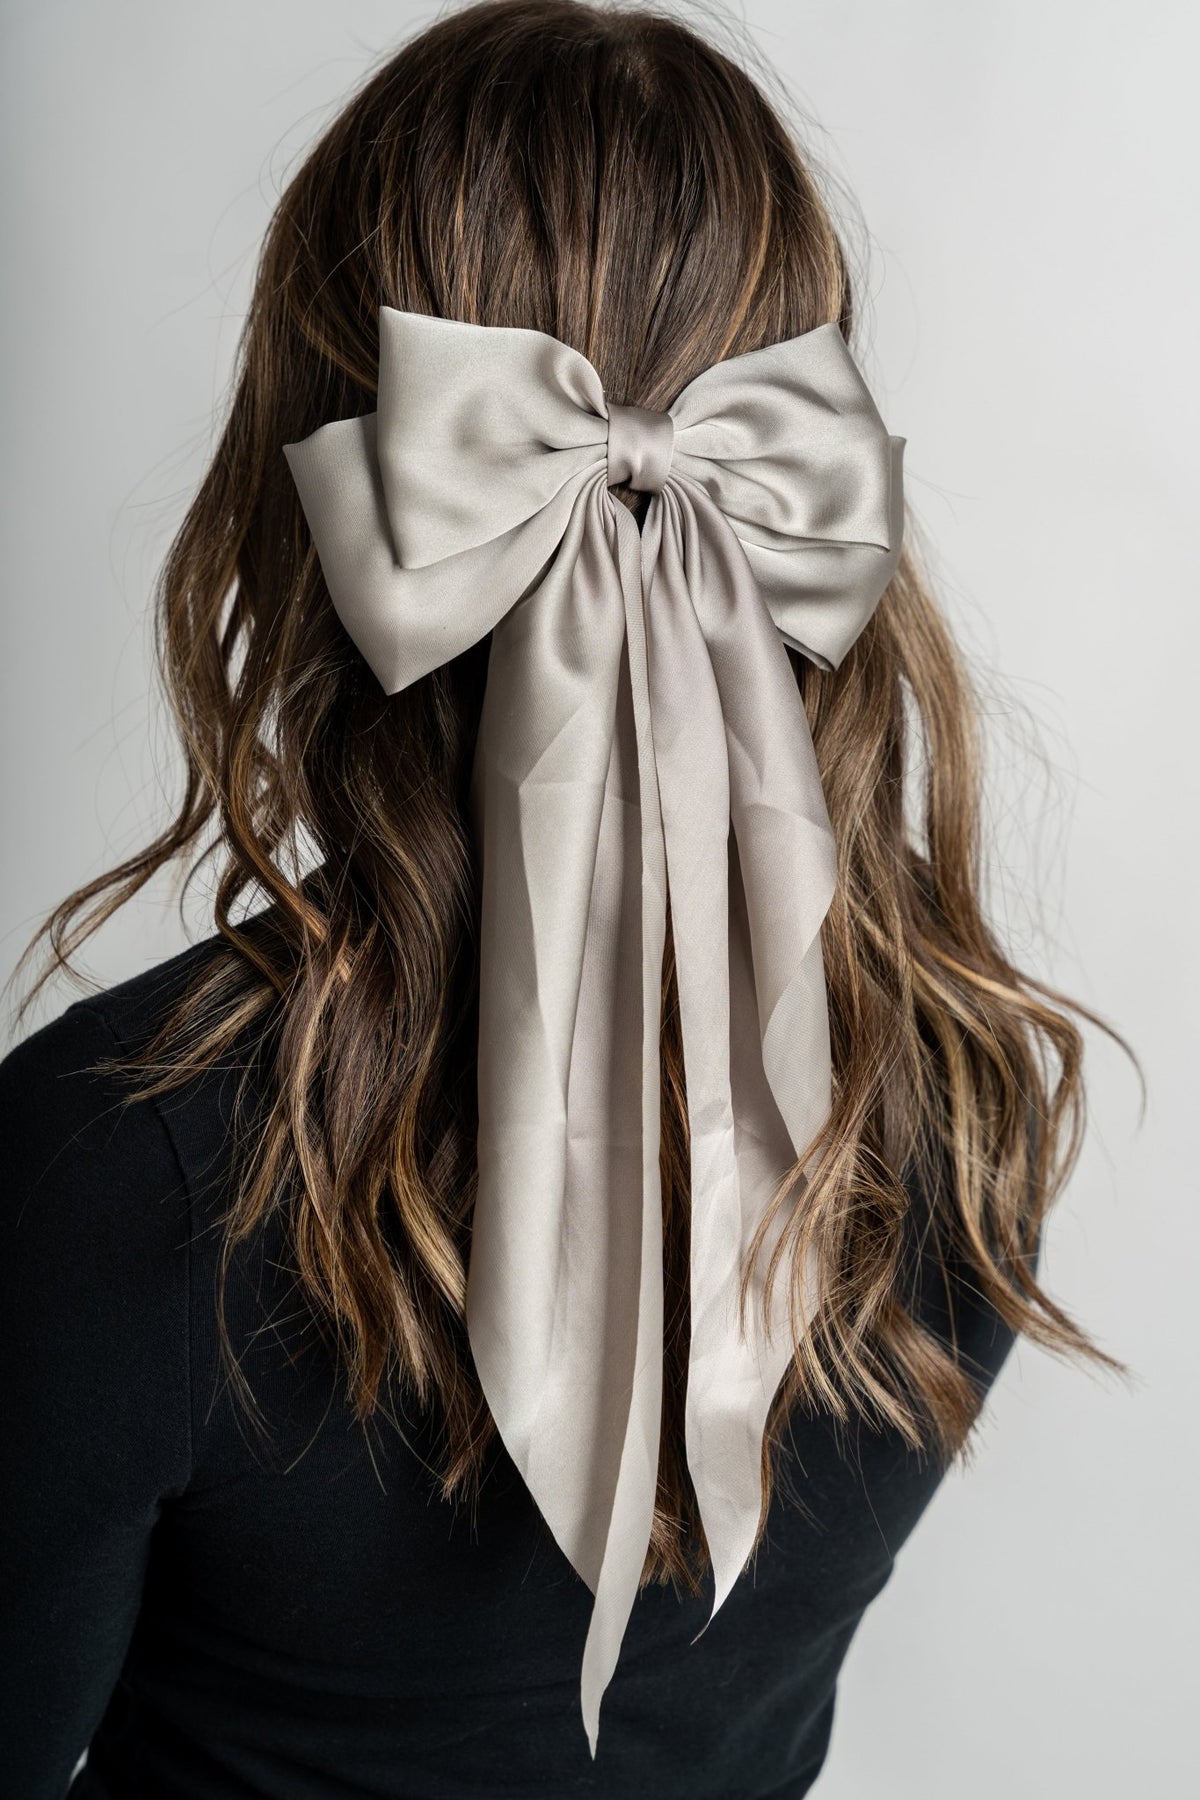 Butterfly satin hair bow clip grey - Trendy Gifts at Lush Fashion Lounge Boutique in Oklahoma City